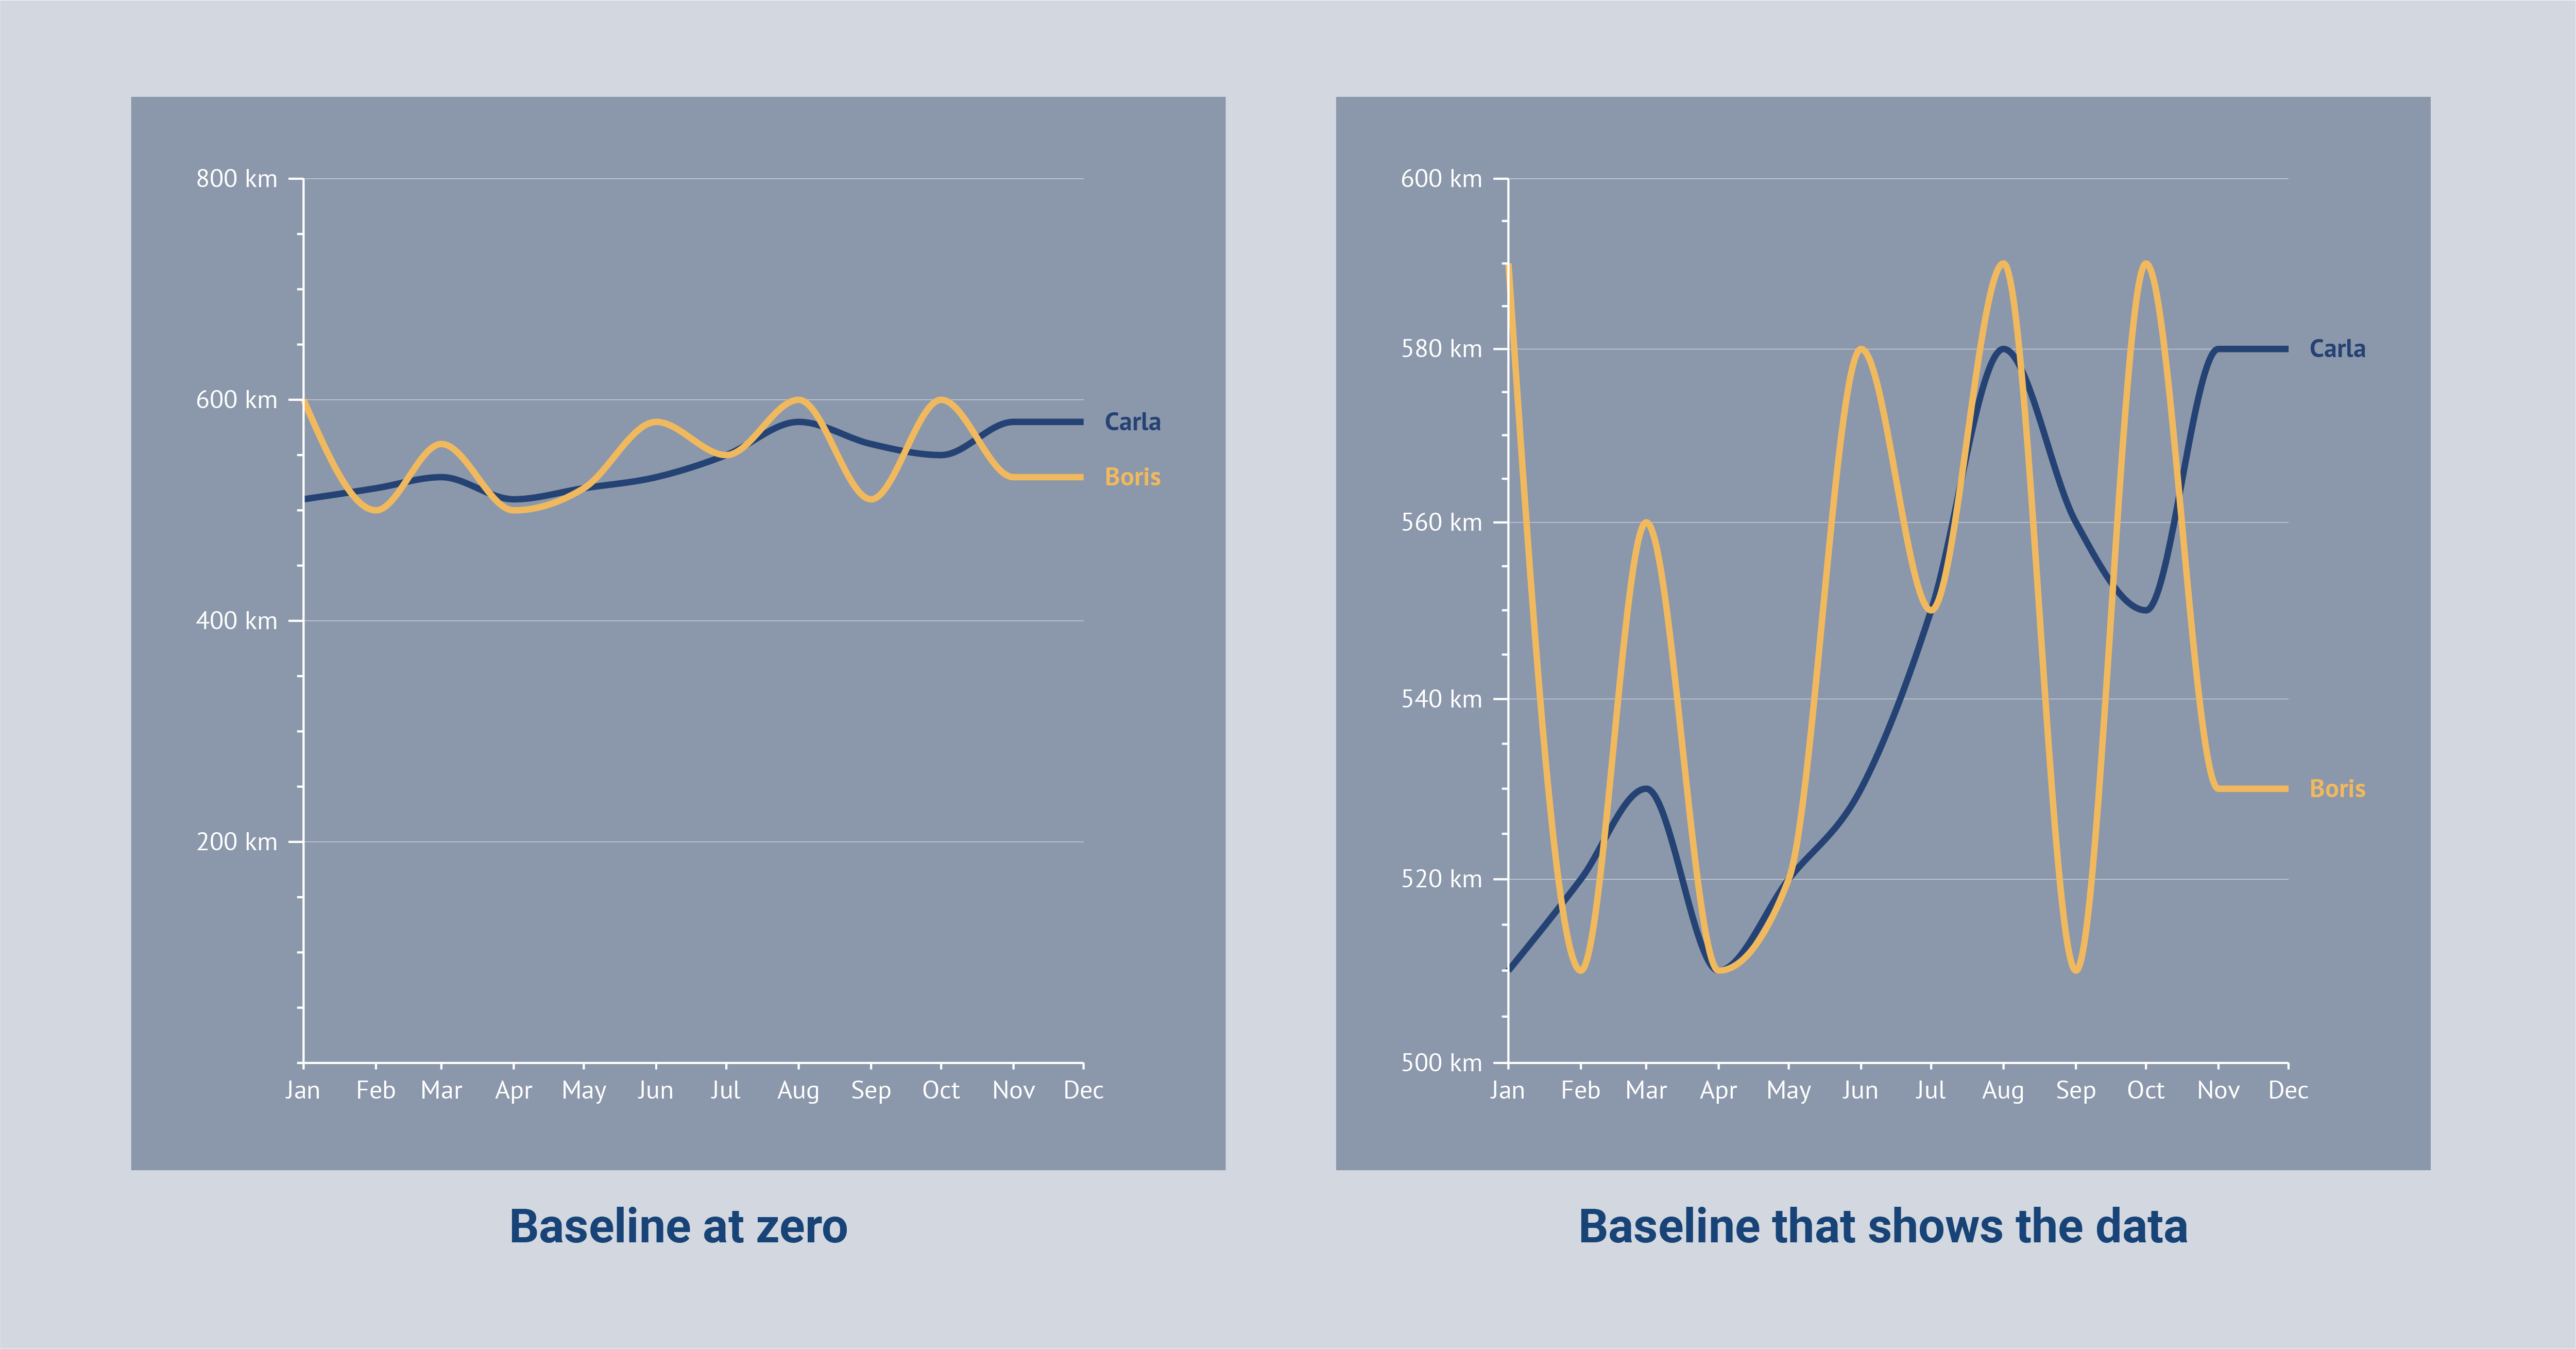 Two charts are shown with different baselines - one shows a baseline at zero, the other shows a baseline that shows the data.